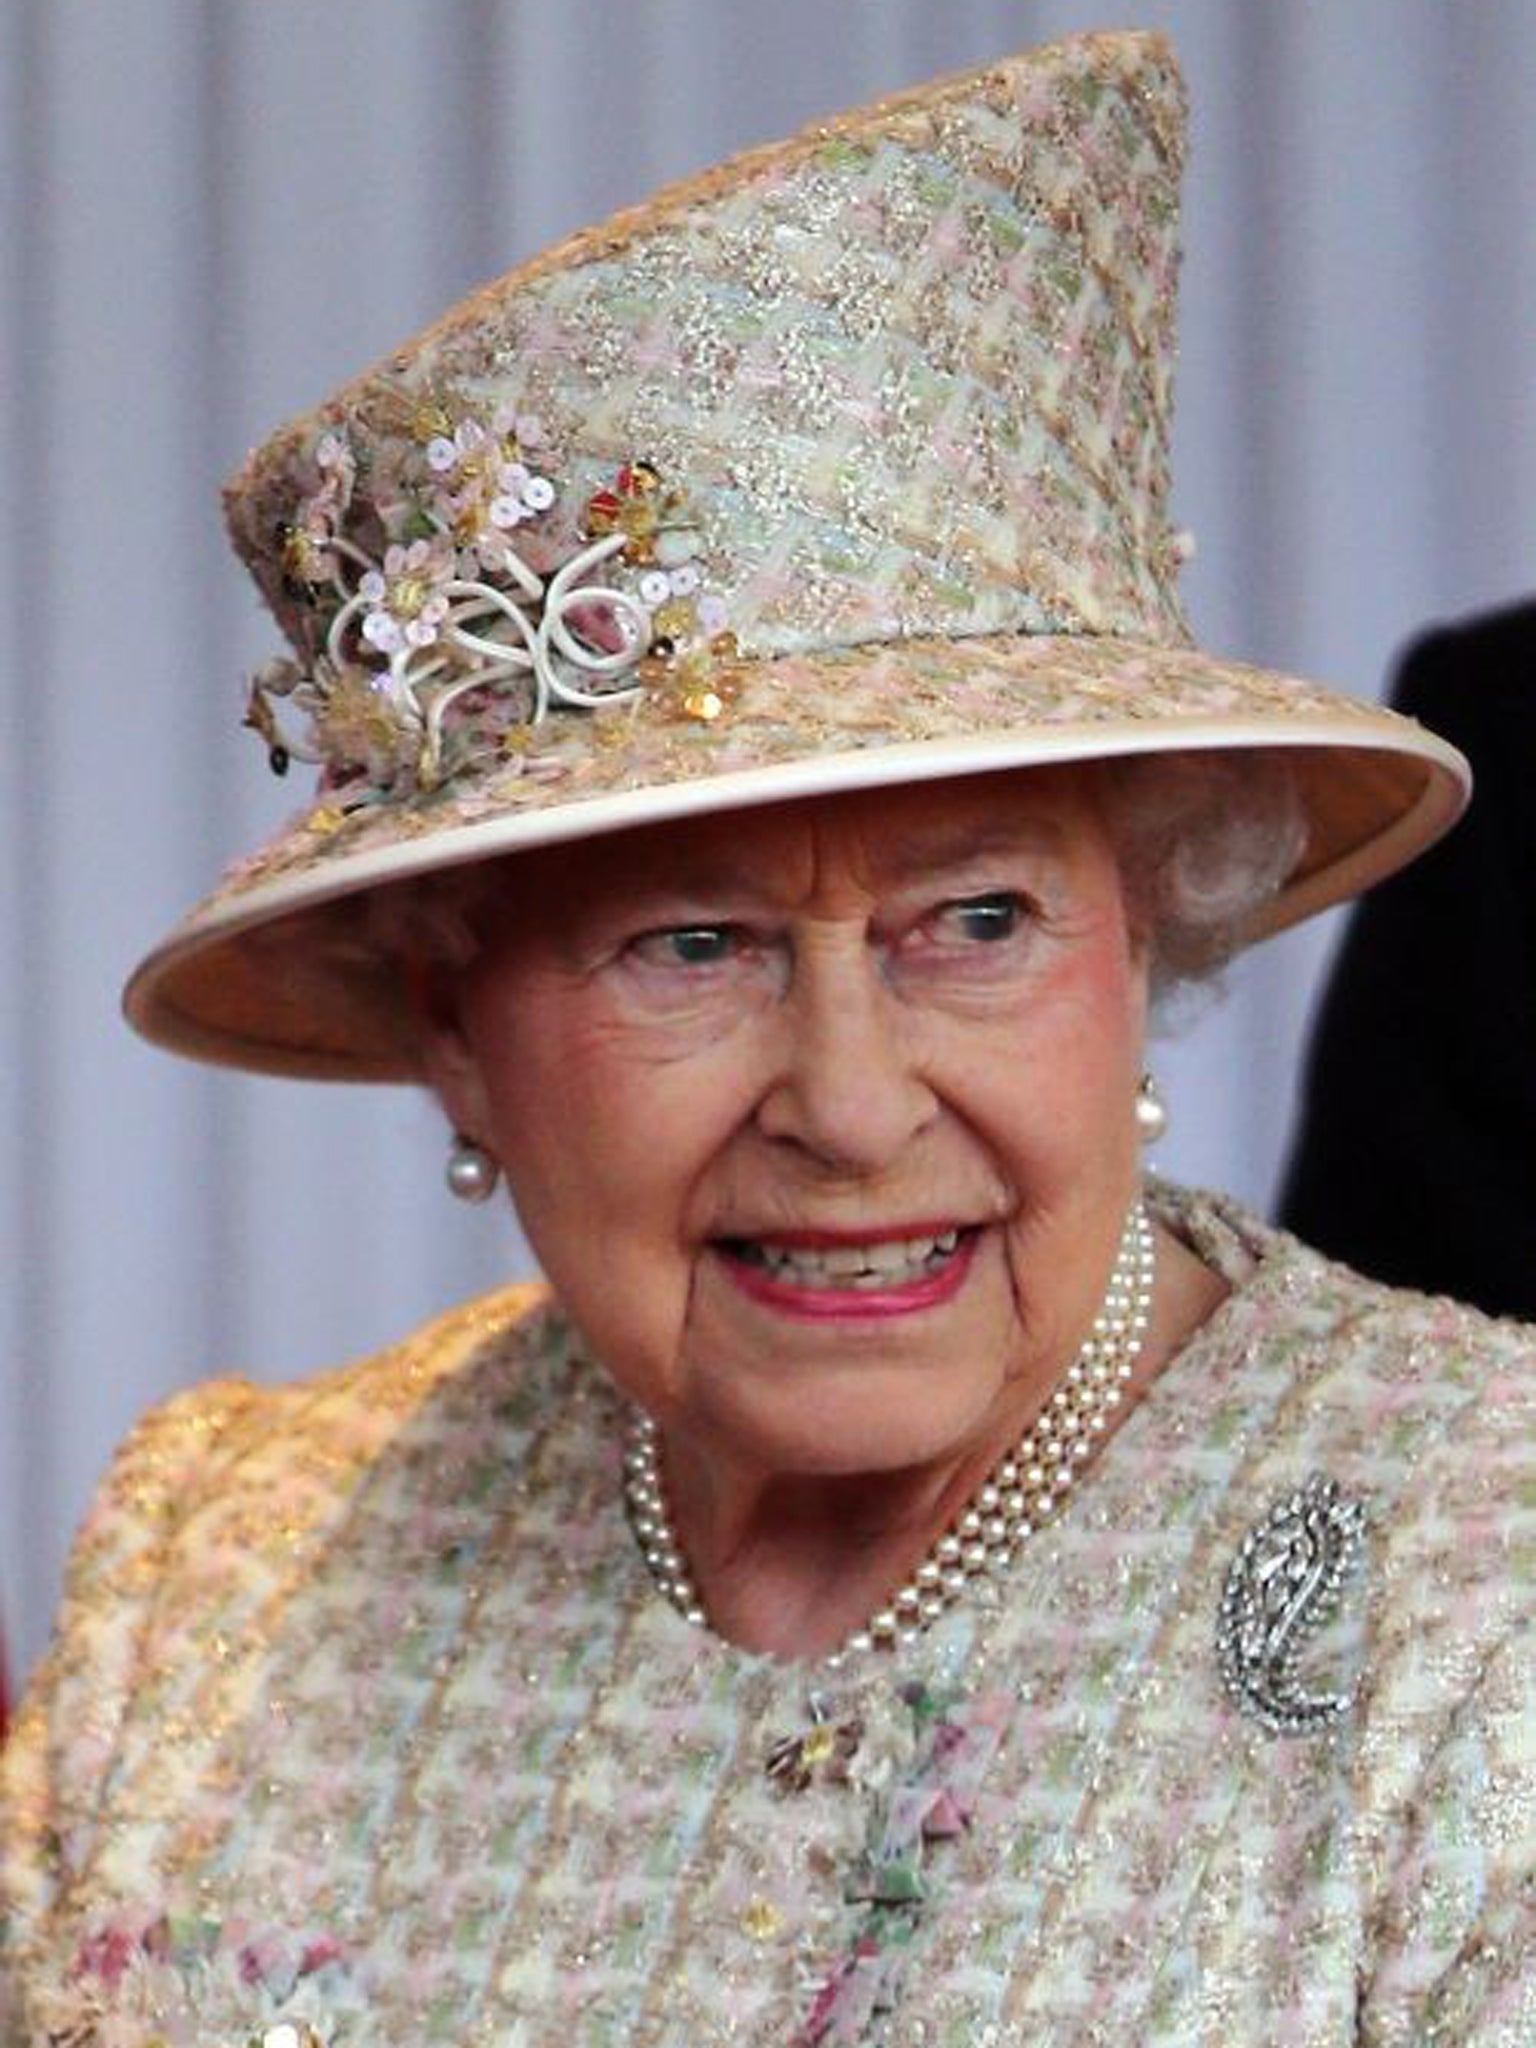 Move not to attend is based on Palace's review of the amount of long-haul travel the Queen is undertaking